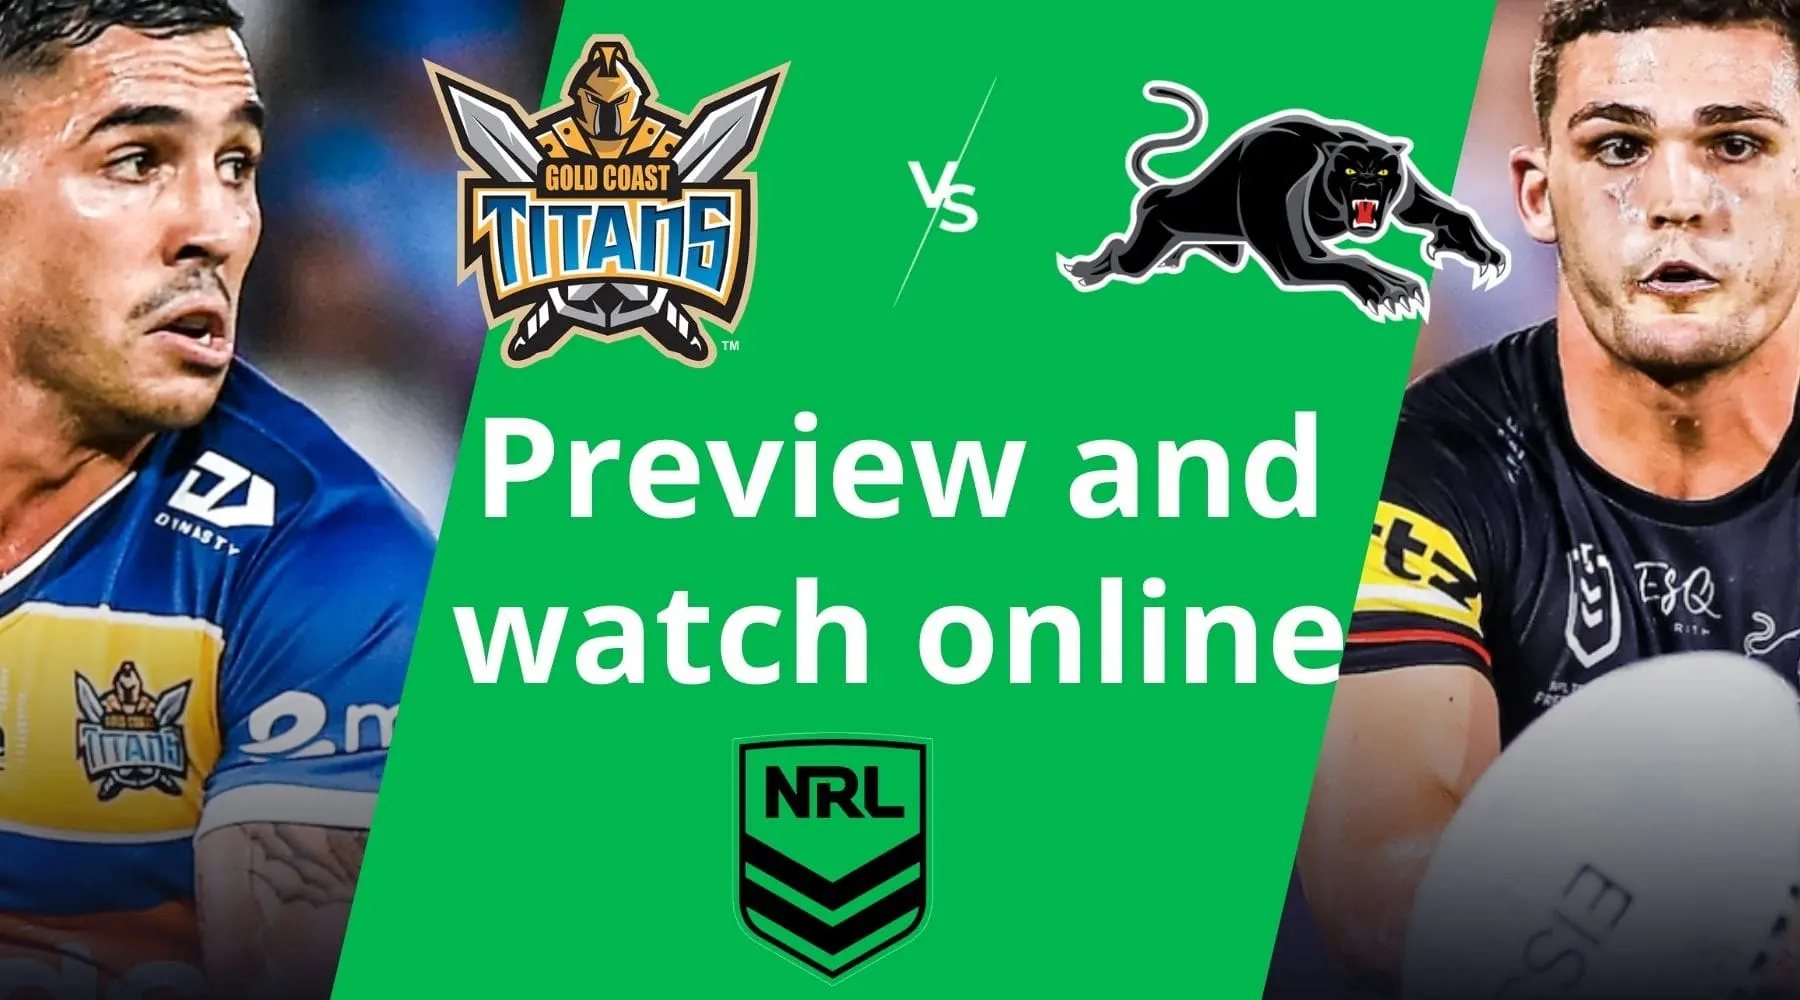 Watch Titans vs Panthers NRL live and match preview